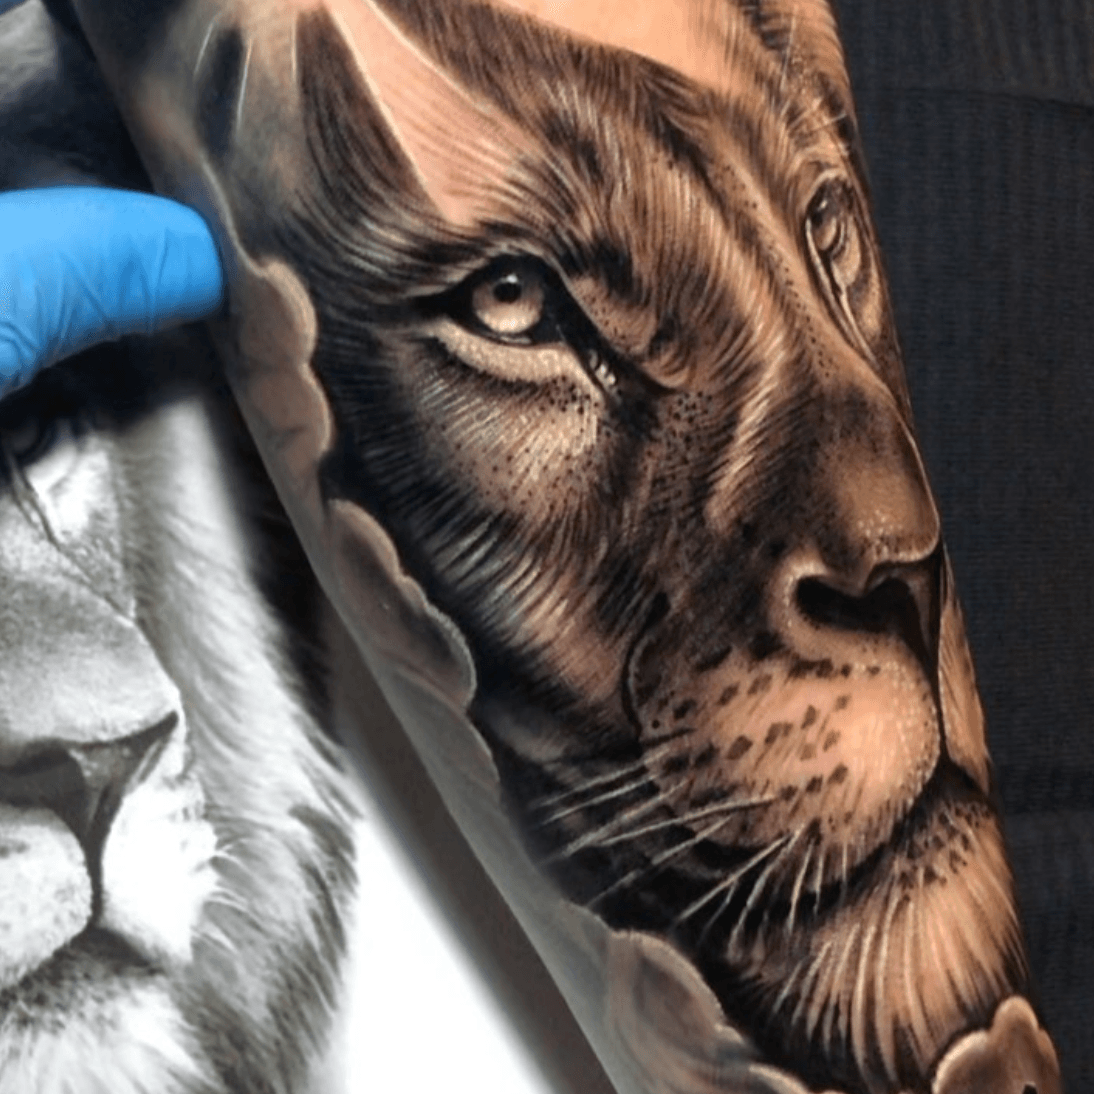 Mashatattoo - Geometric lion, lines and shading. Tattoo on the chest |  Facebook